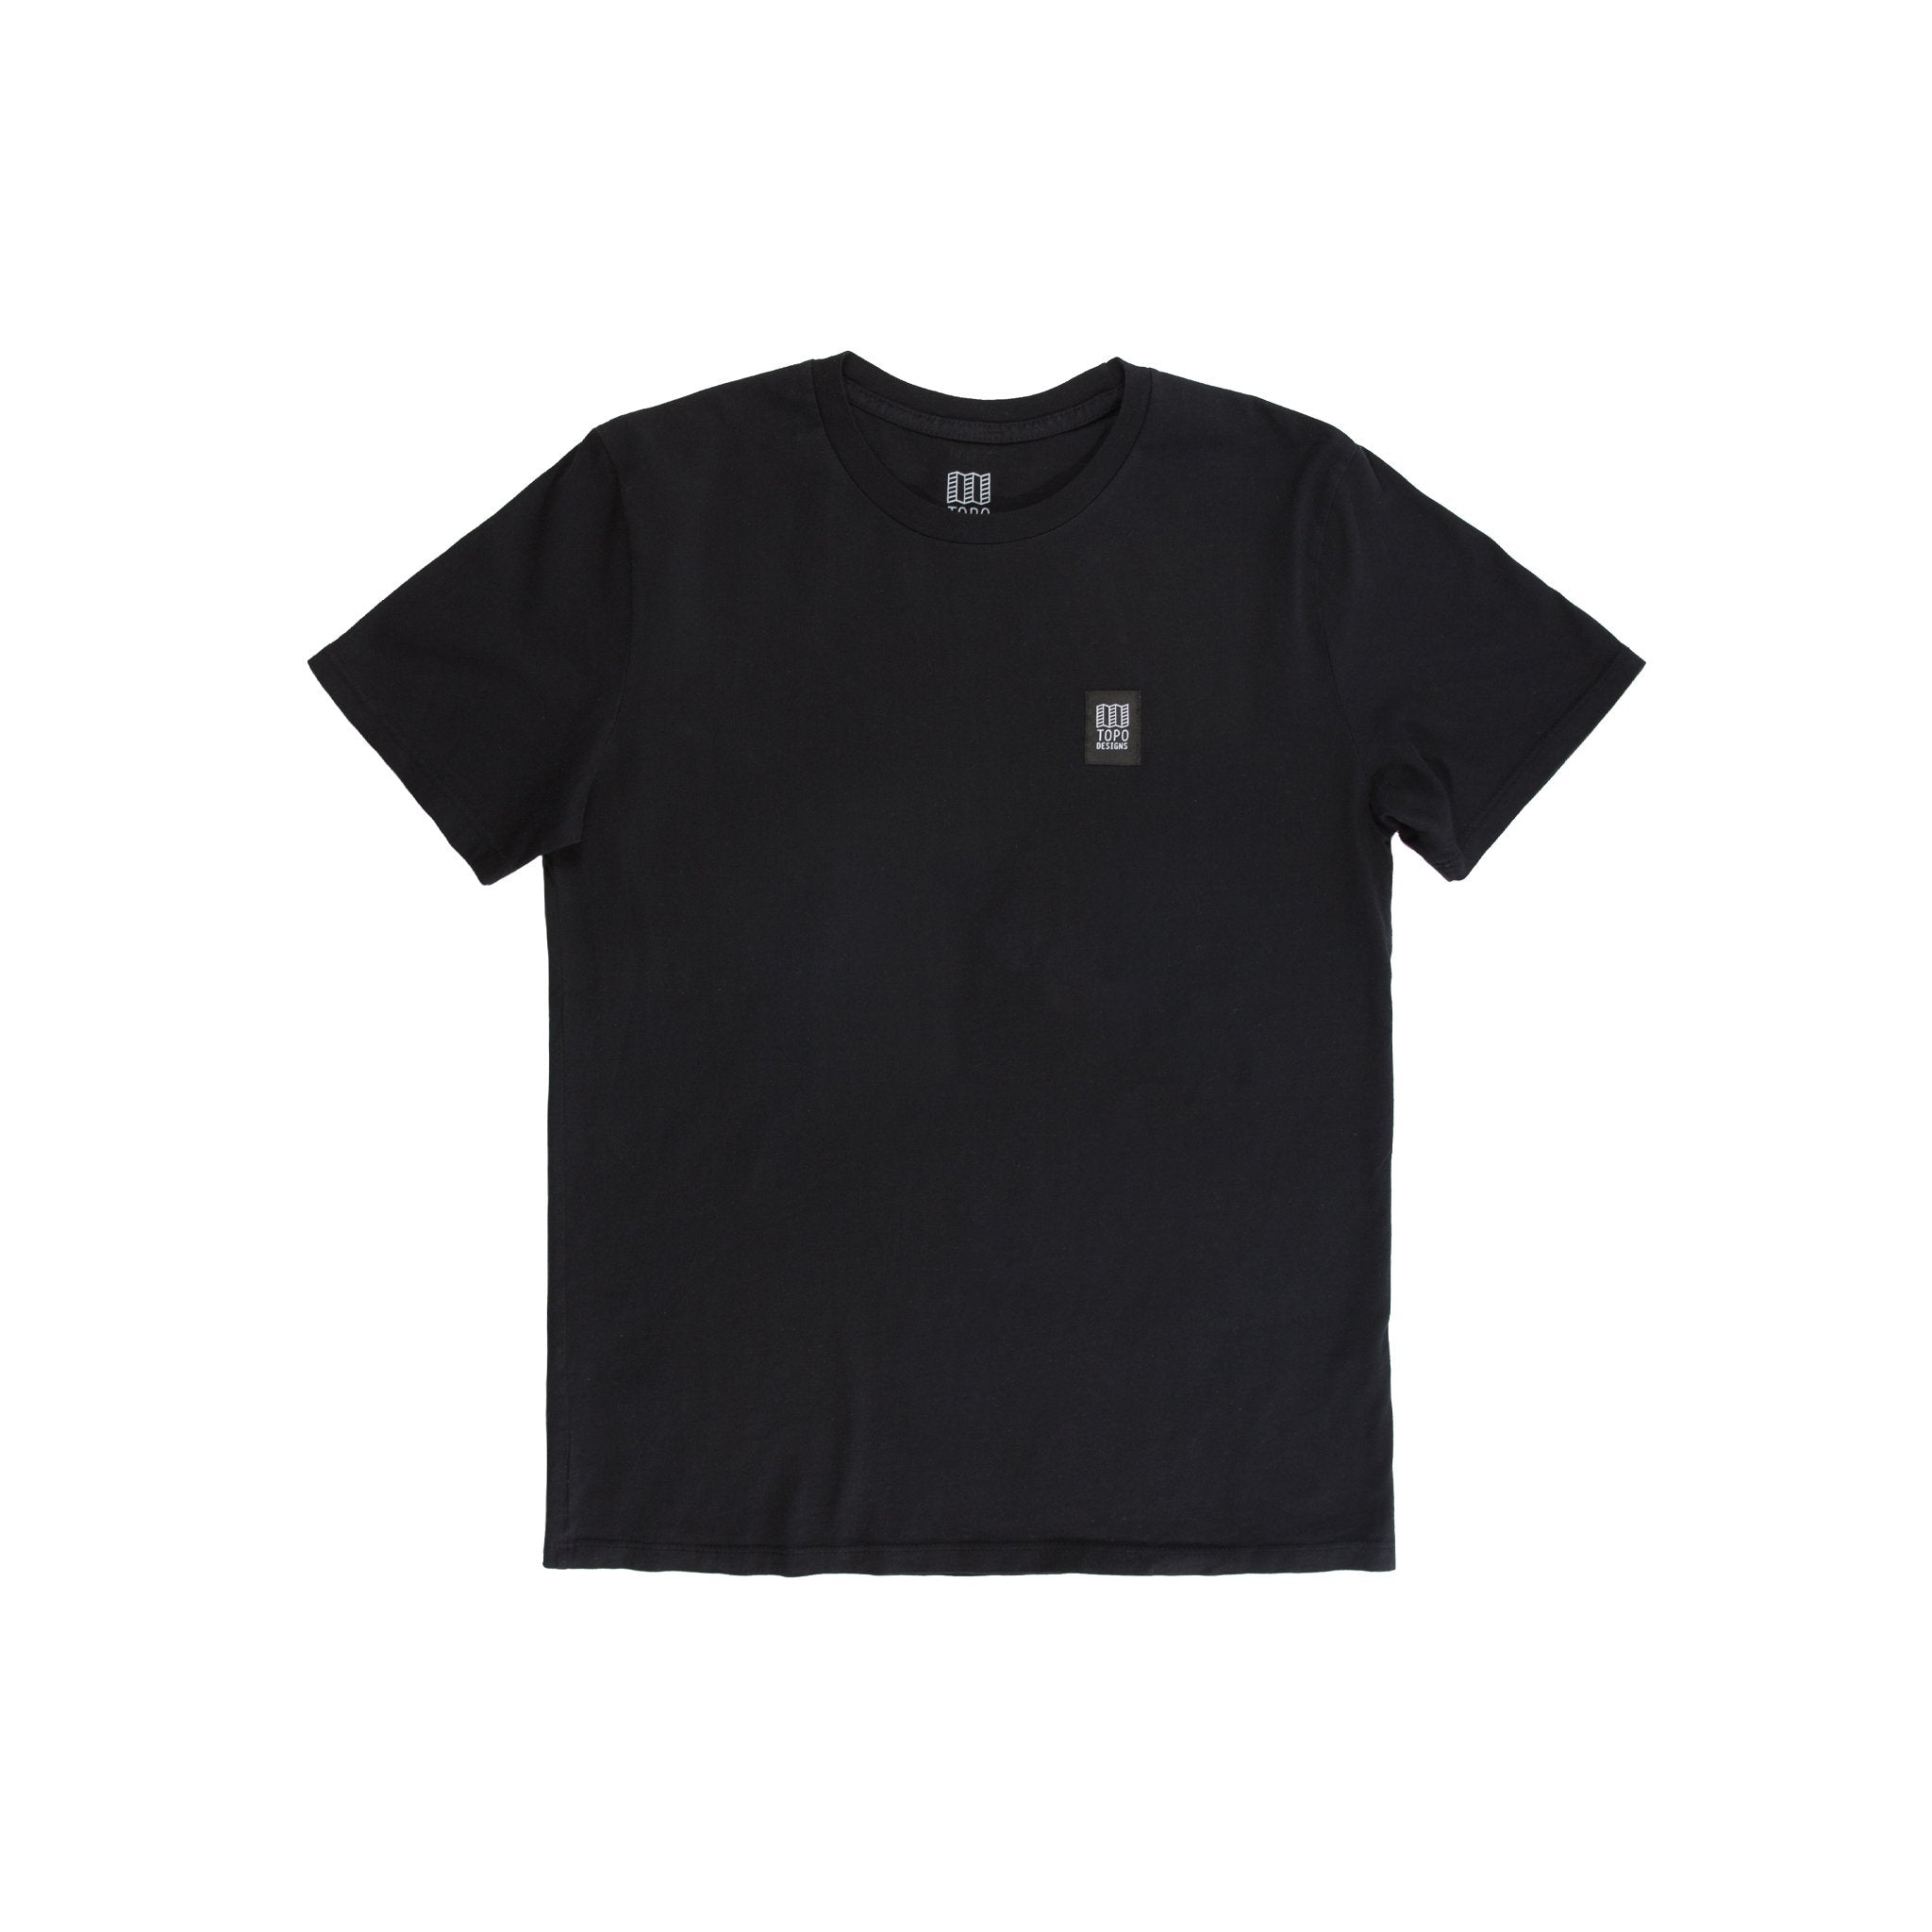 Front product shot of Topo Designs Men's Label short sleeve t-shirt in "Black".